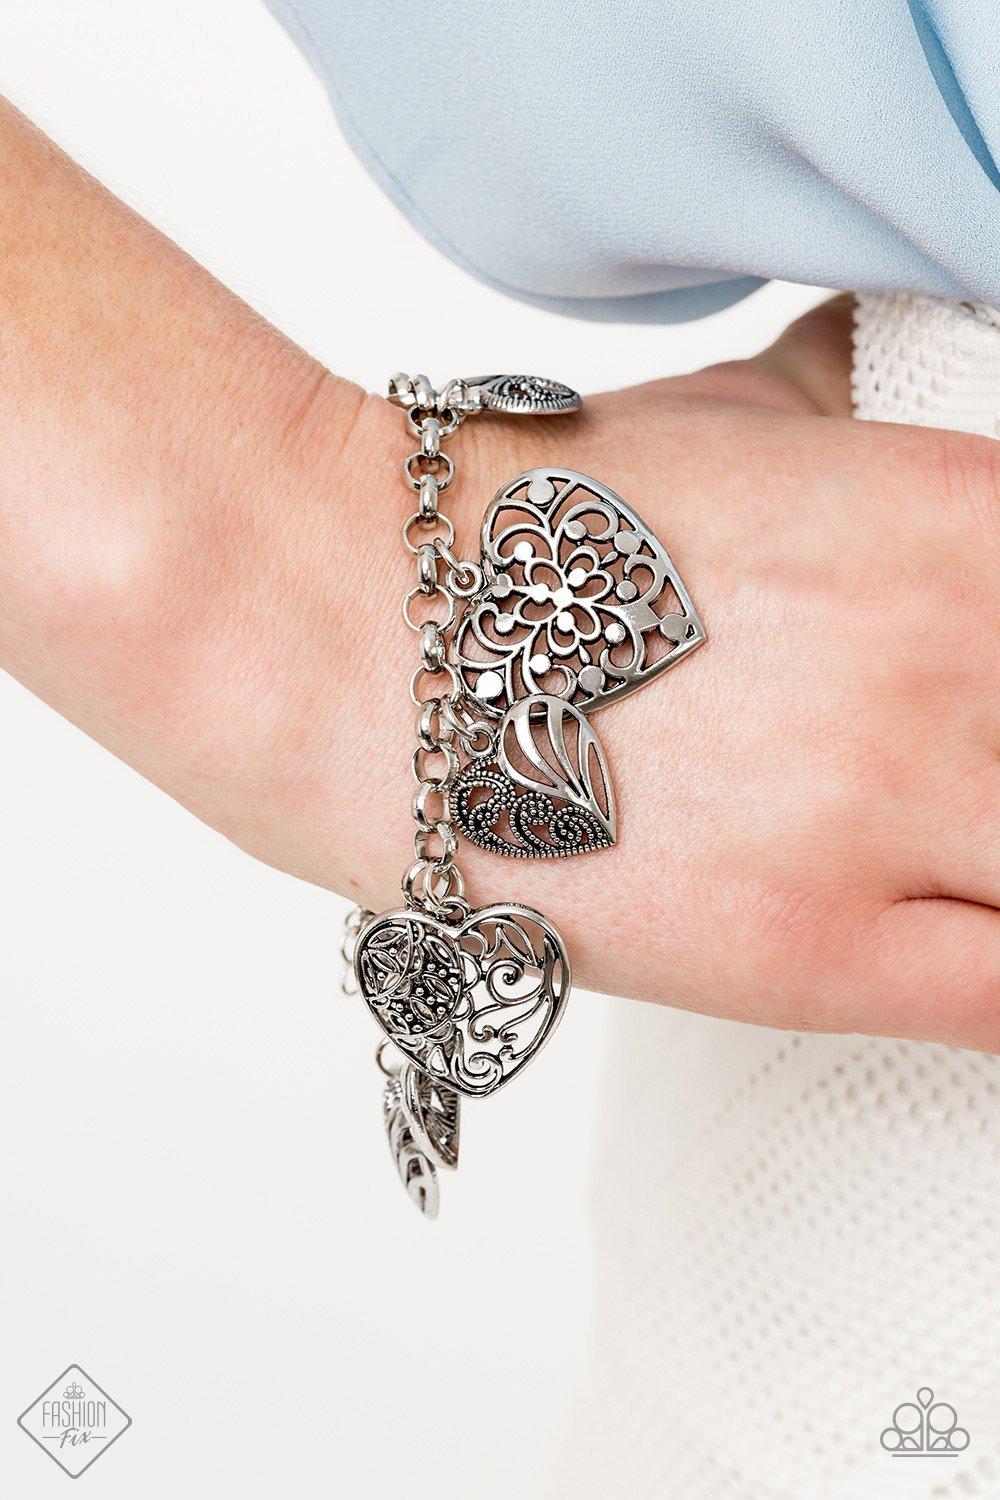 Completely Devoted Silver Heart Bracelet - Paparazzi Accessories-CarasShop.com - $5 Jewelry by Cara Jewels